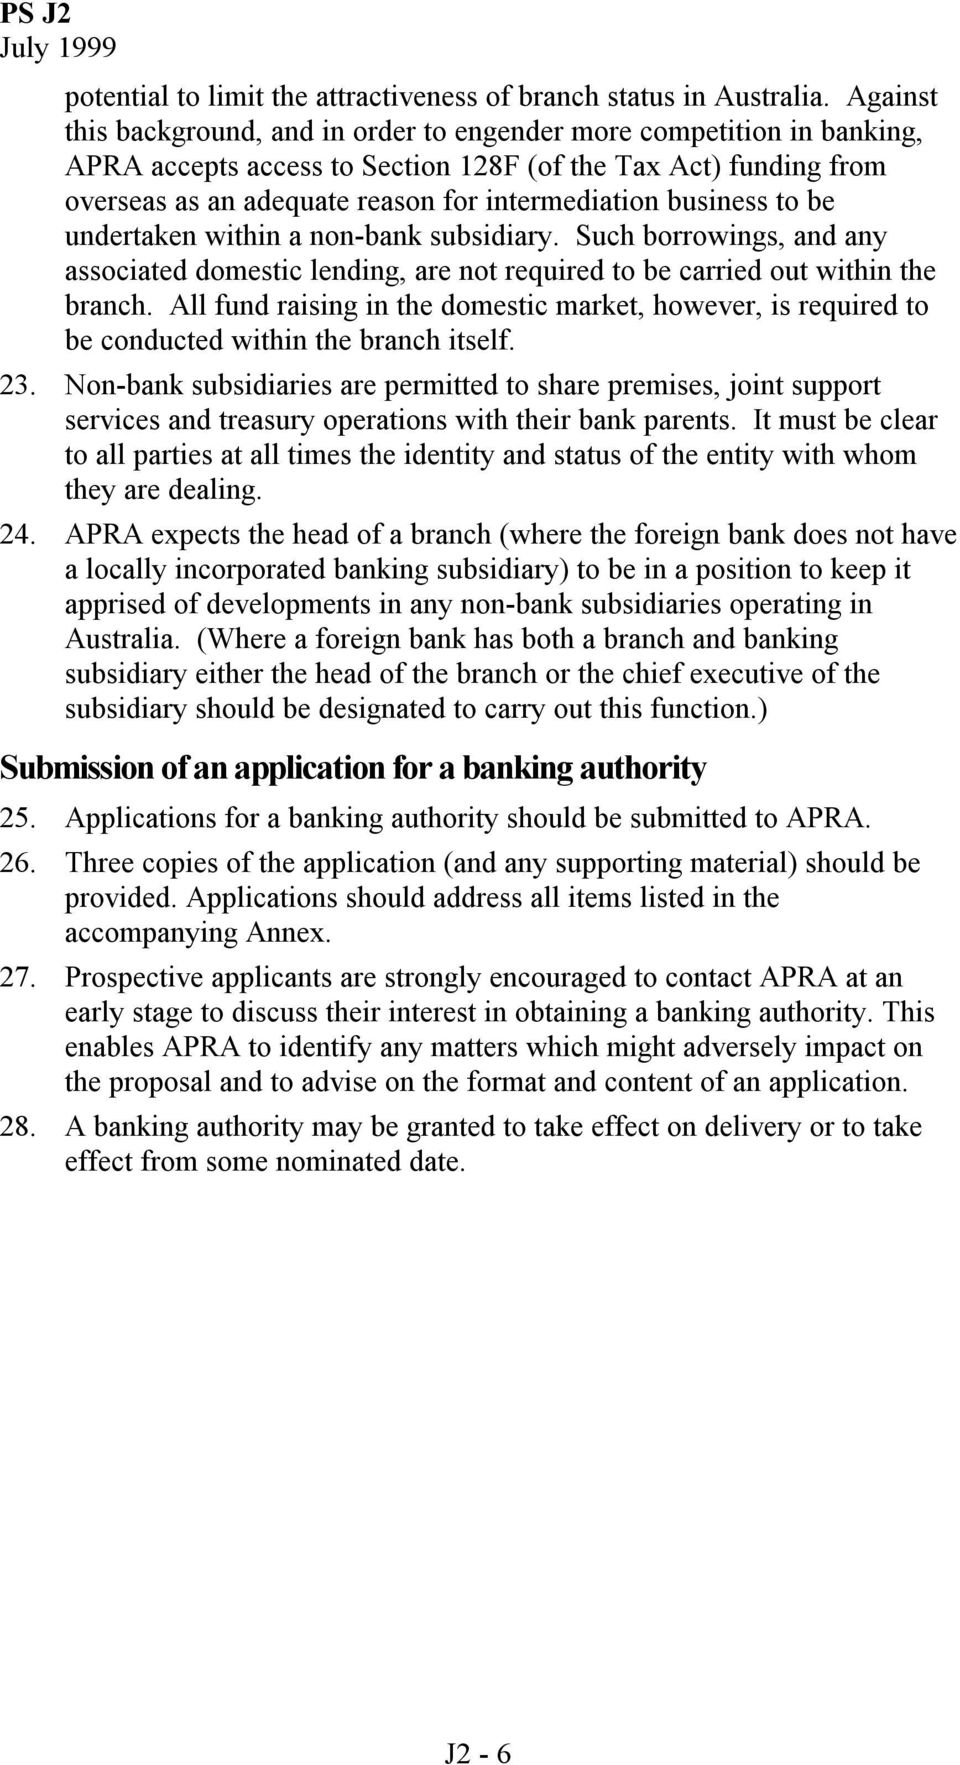 business to be undertaken within a non-bank subsidiary. Such borrowings, and any associated domestic lending, are not required to be carried out within the branch.